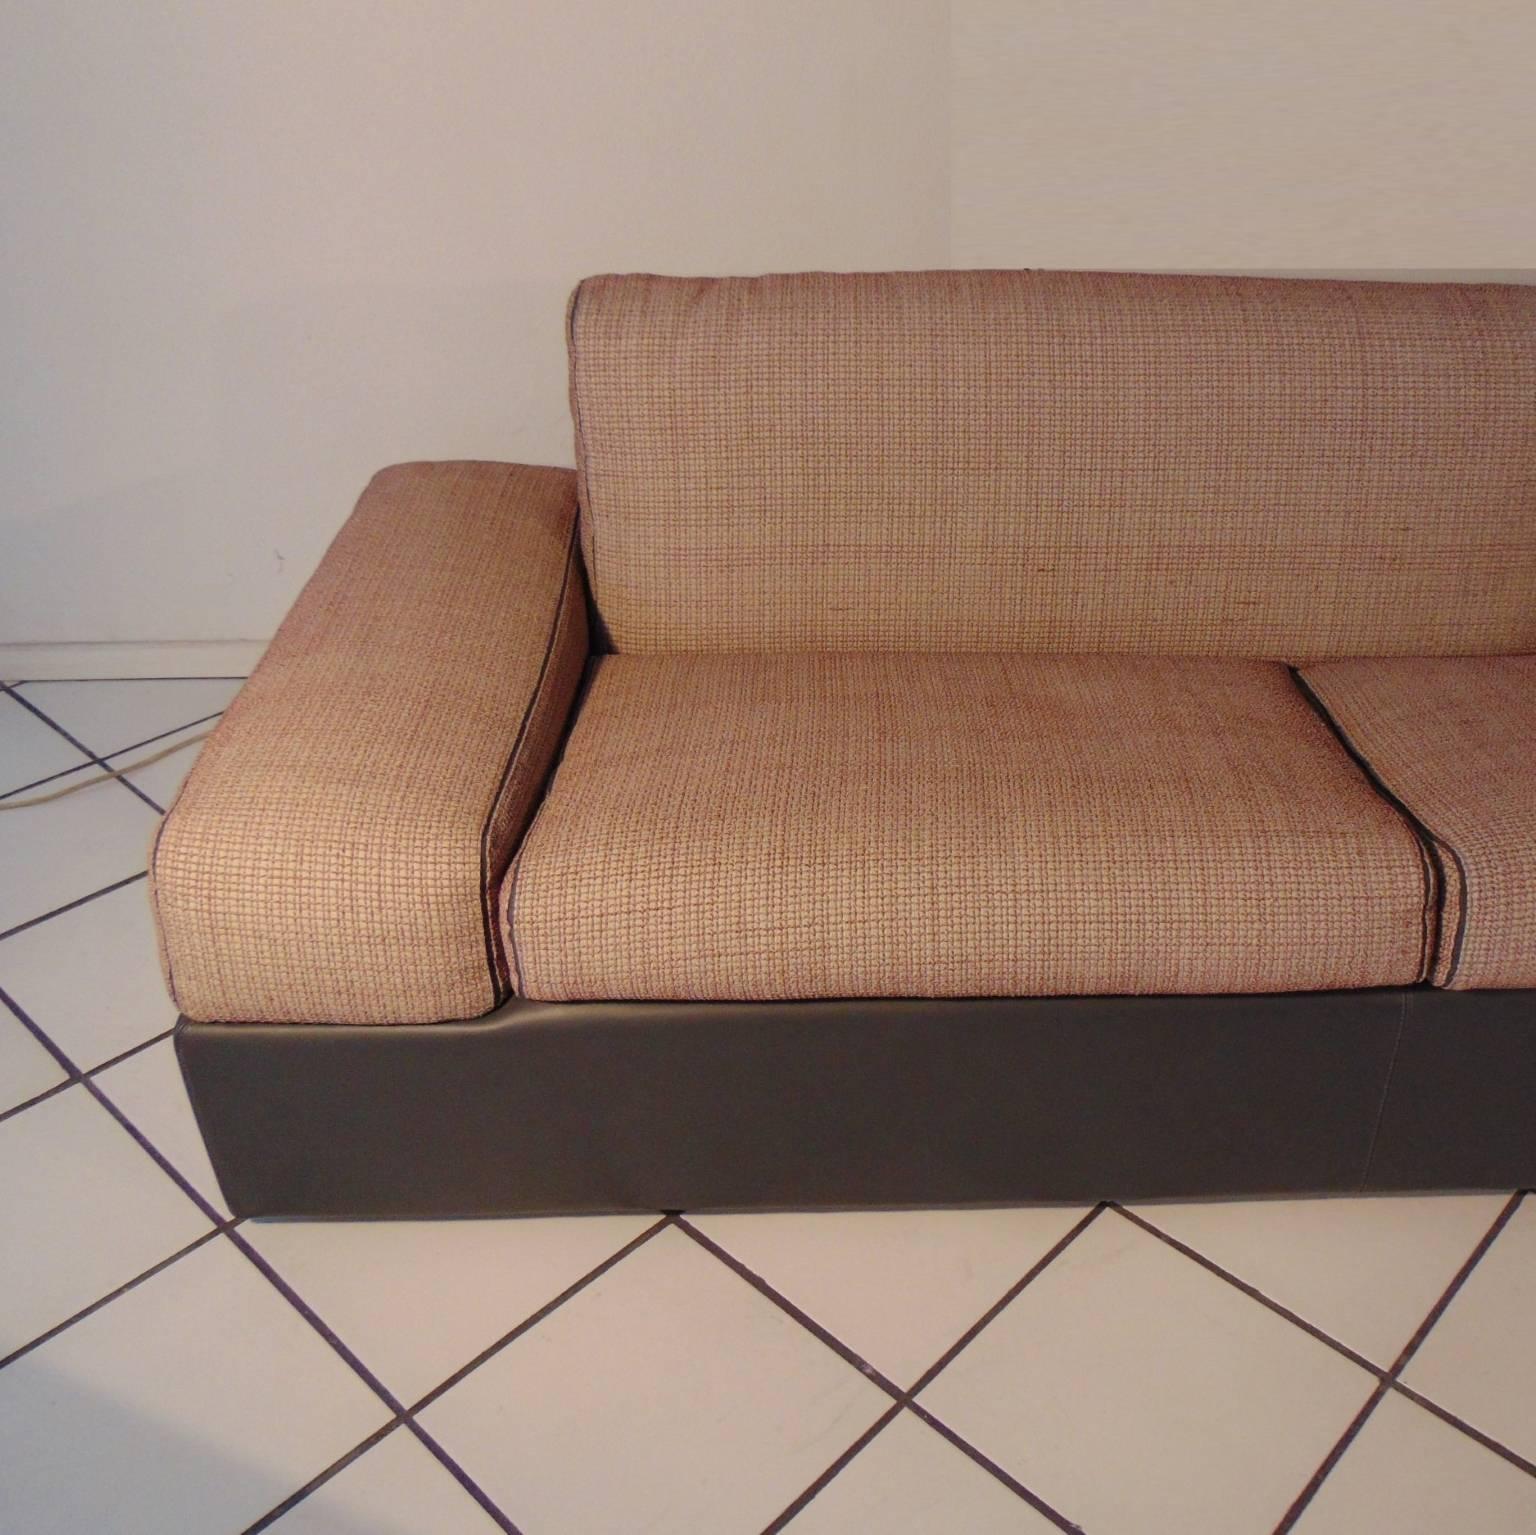 Late 20th Century 4-Seater Sofa Gray Leather with Silk and Leather Cushions, Sormani Italy, 1980s For Sale